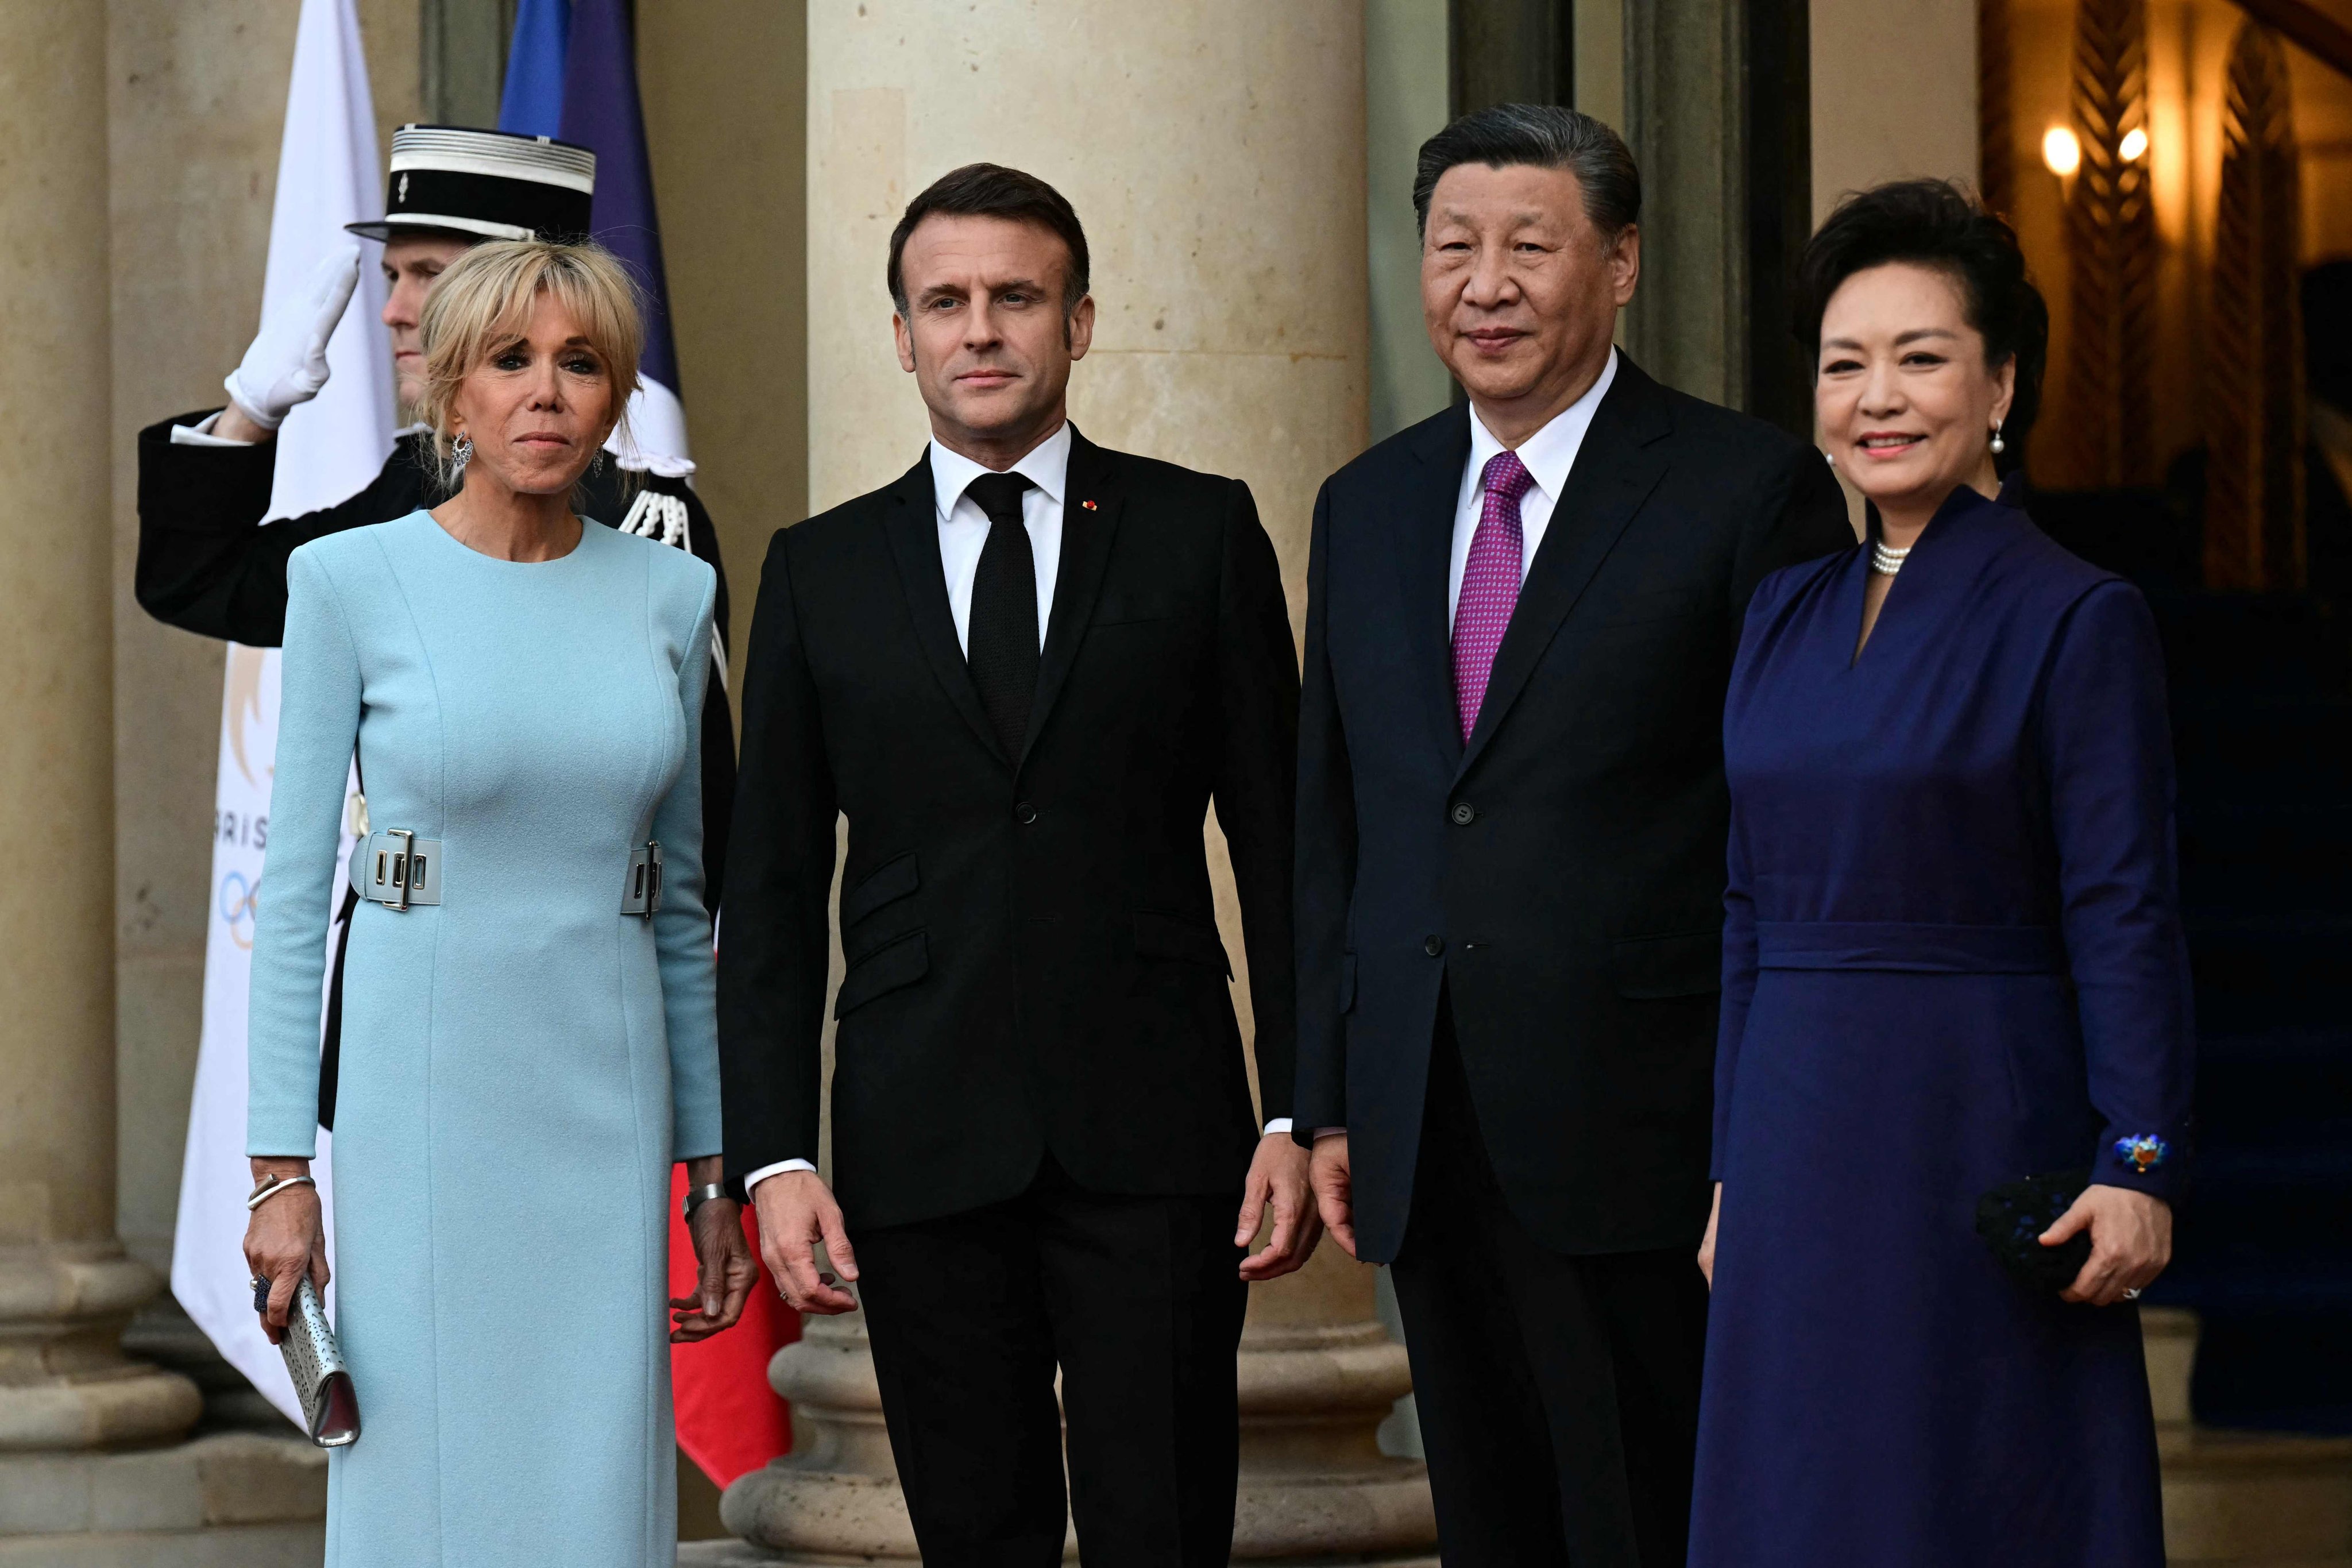 French President Emmanuel Macron and his Chinese counterpart Xi Jinping, flanked by first ladies Brigitte Macron (left) and Peng Liyuan (right), before Monday’s official state dinner at the Elysee Palace in Paris. Photo: AFP